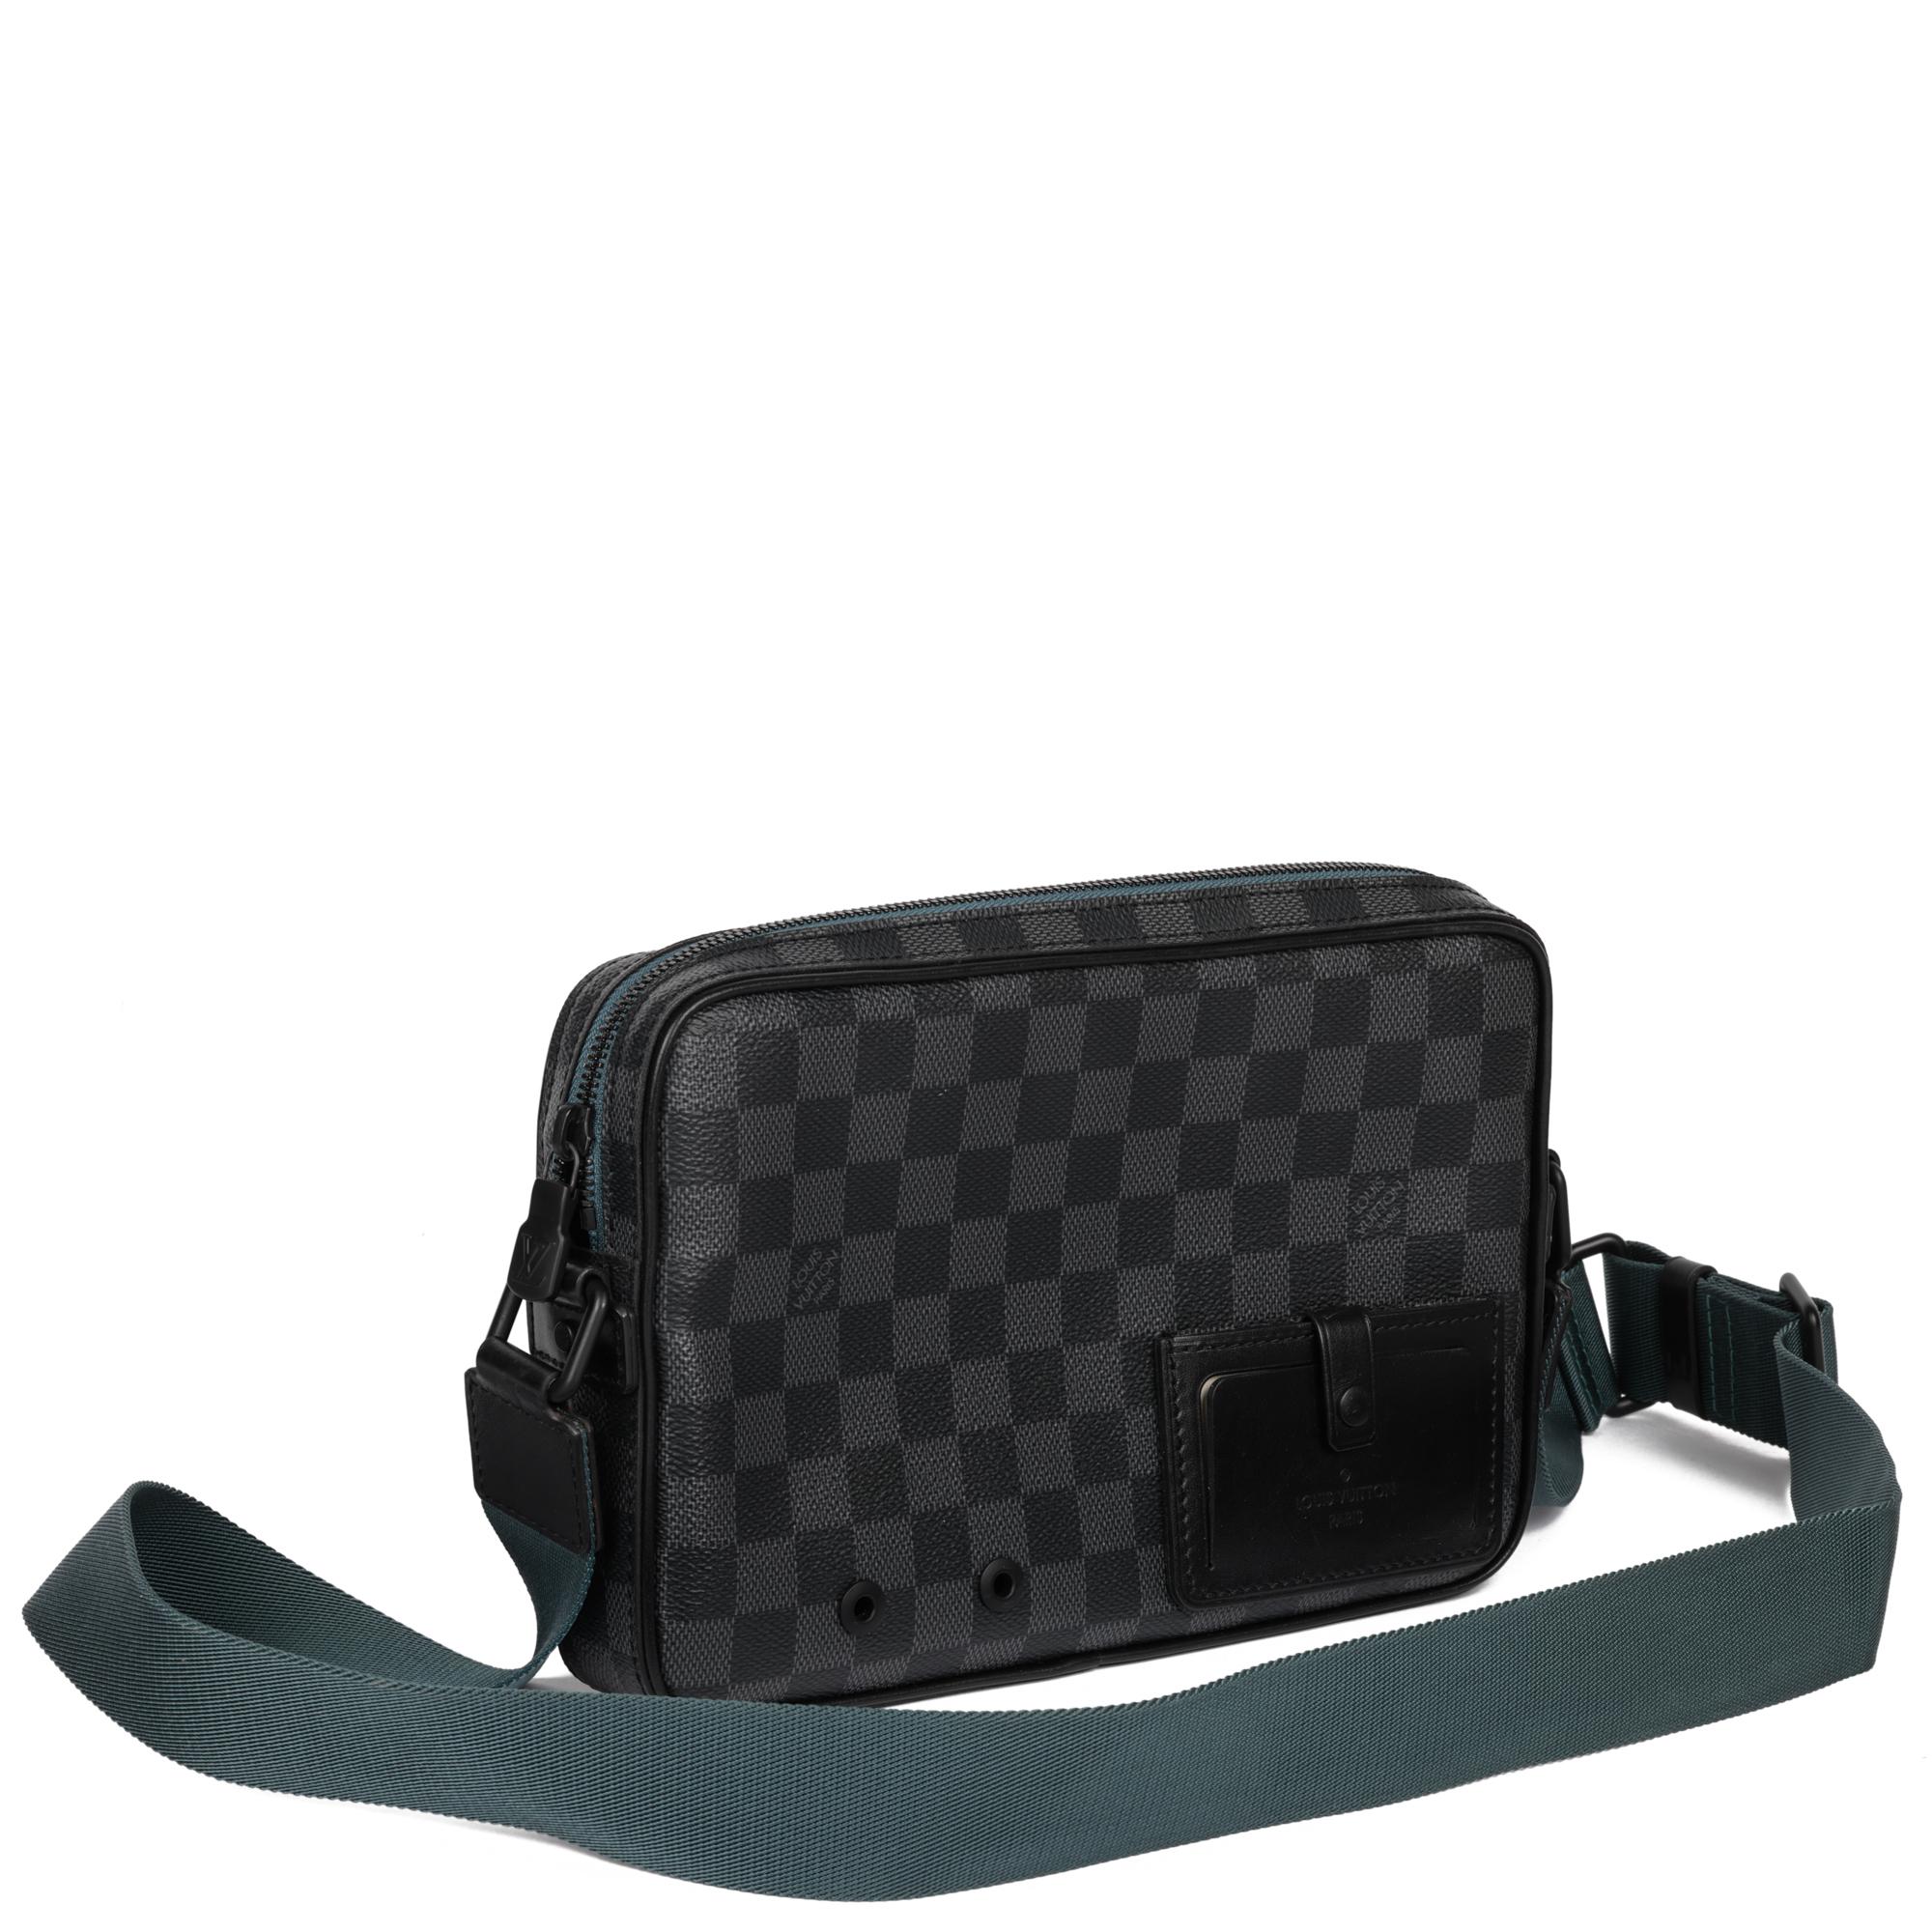 LOUIS VUITTON
Damier Ebene Coated Canvas & Black Calfskin Leather Alpha Messenger

Xupes Reference: HB5168
Serial Number: CA4159
Age (Circa): 2019
Accompanied By: Louis Vuitton Dust Bag, Box
Authenticity Details: Date Stamp (Made in Spain)
Gender: